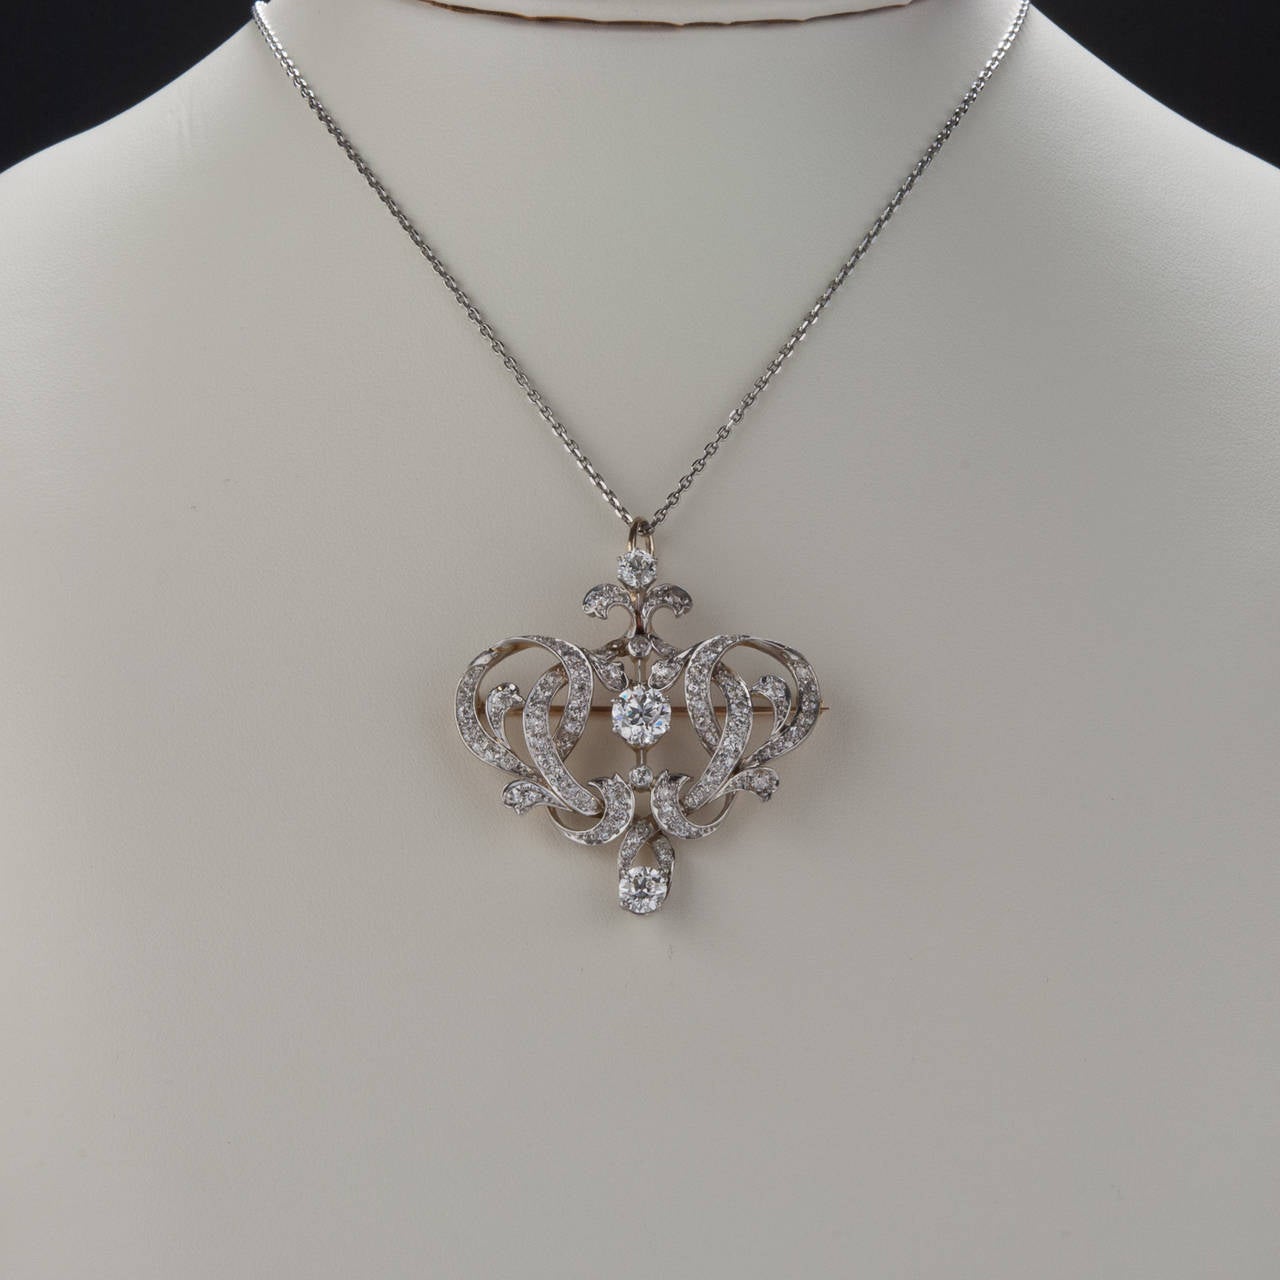 This is a gorgeous diamond pin/pendant from the Edwardian period of jewelry design. This piece is made with platinum on gold and stunning Old European cut diamonds. The diamonds have a combined weight of approximately 3.50 carats. This piece